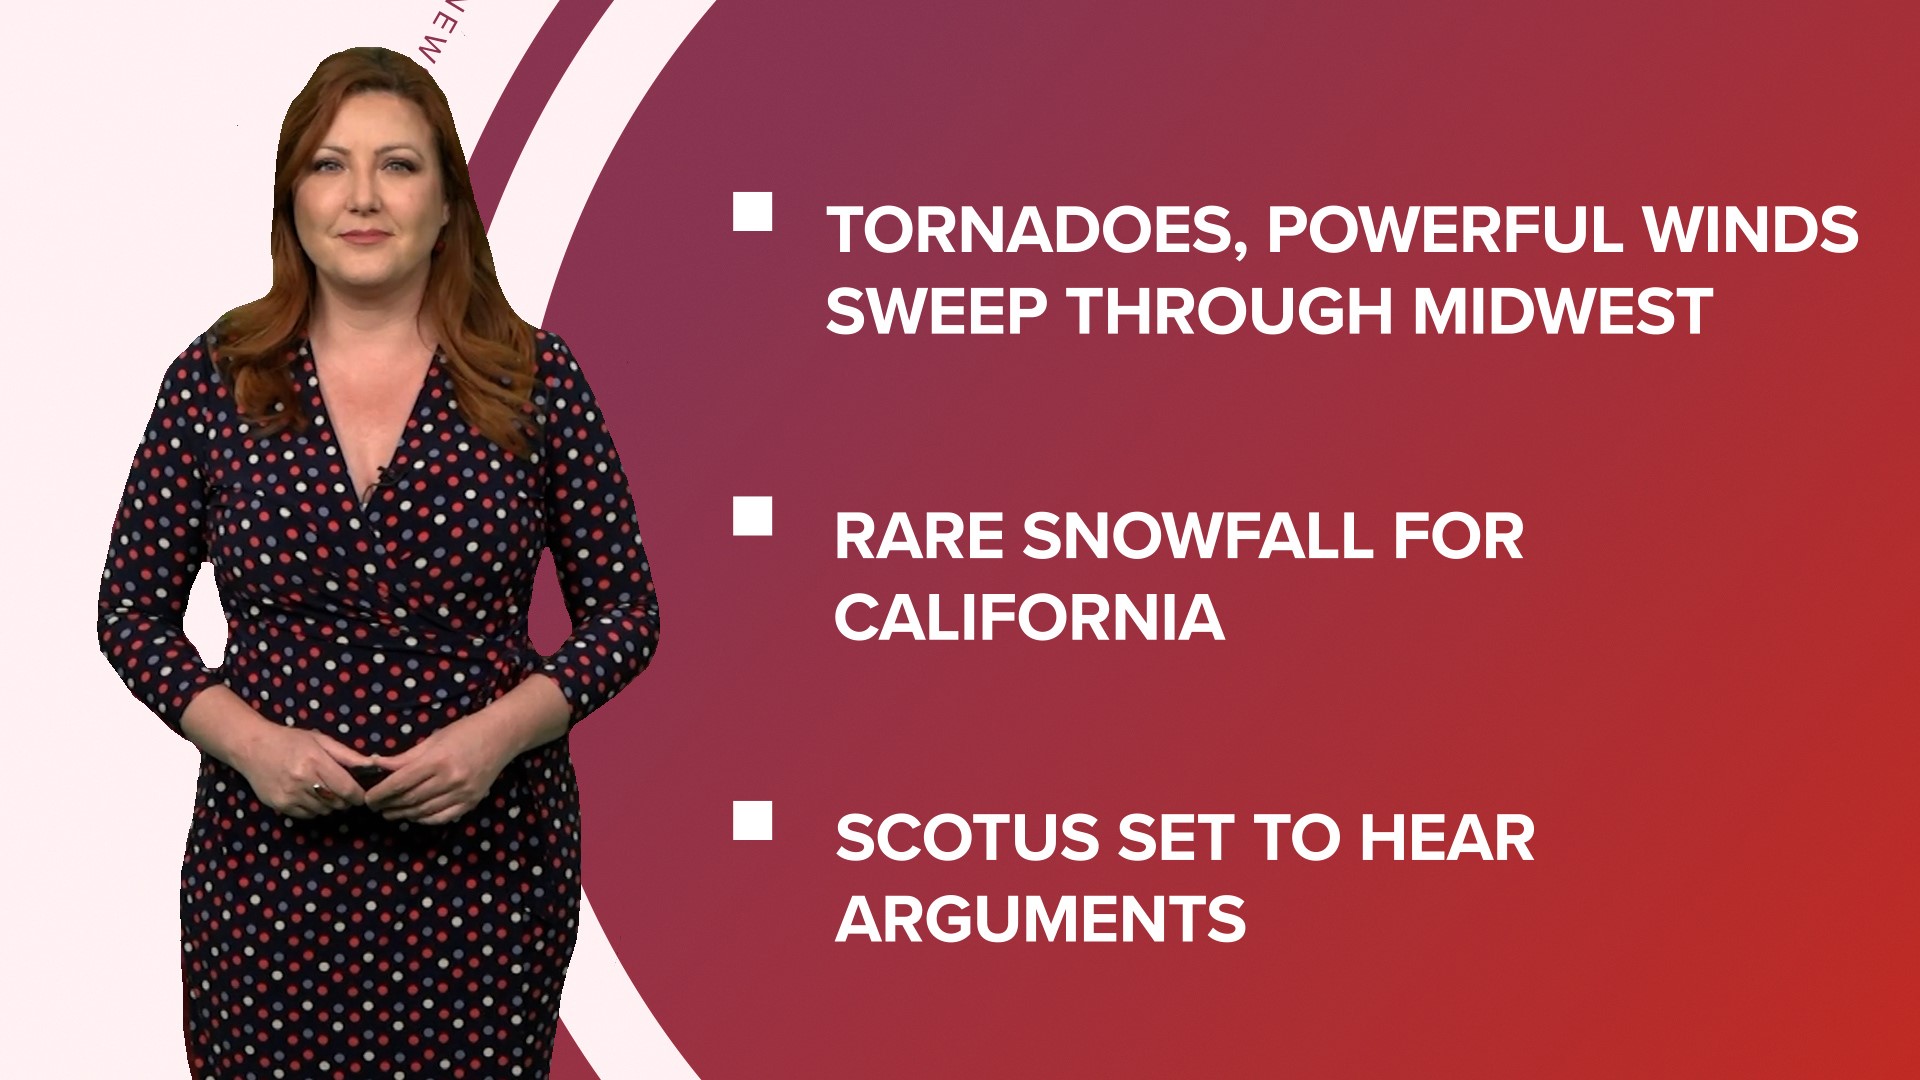 A look at what is happening in the news from severe weather hitting parts of the U.S. including rare snow in California to TikTok security concerns.